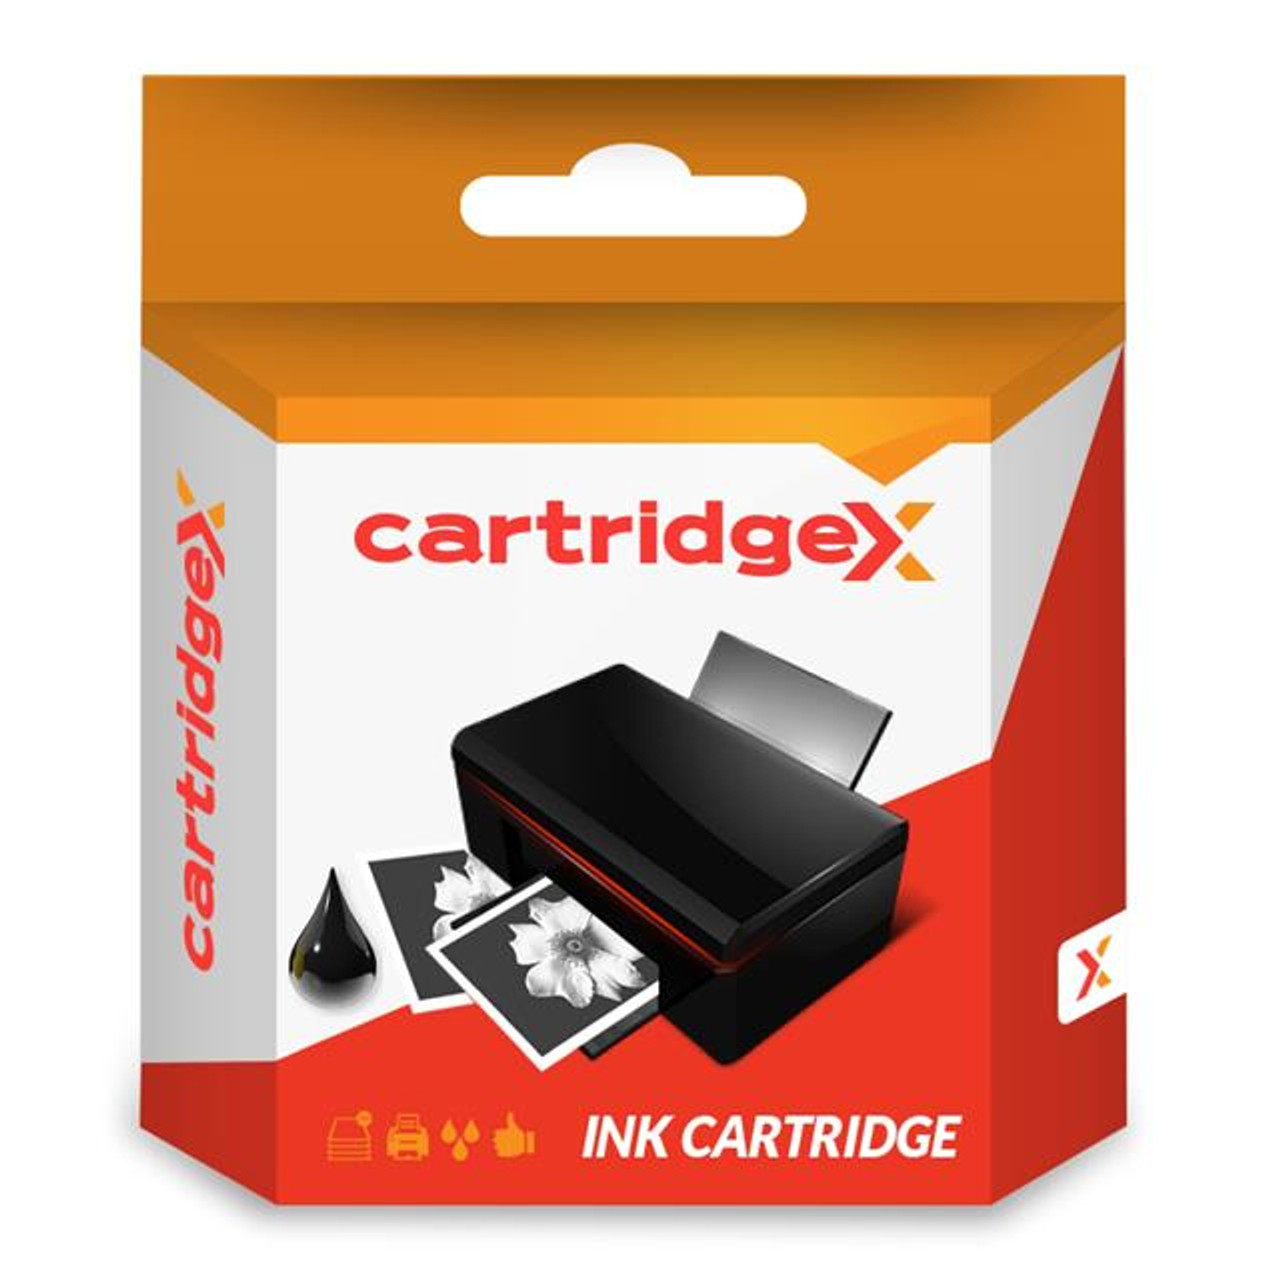 Compatible Black Ink Cartridge For Brother Dcp-167c Dcp-195c Dcp-197c Lc980 Bk